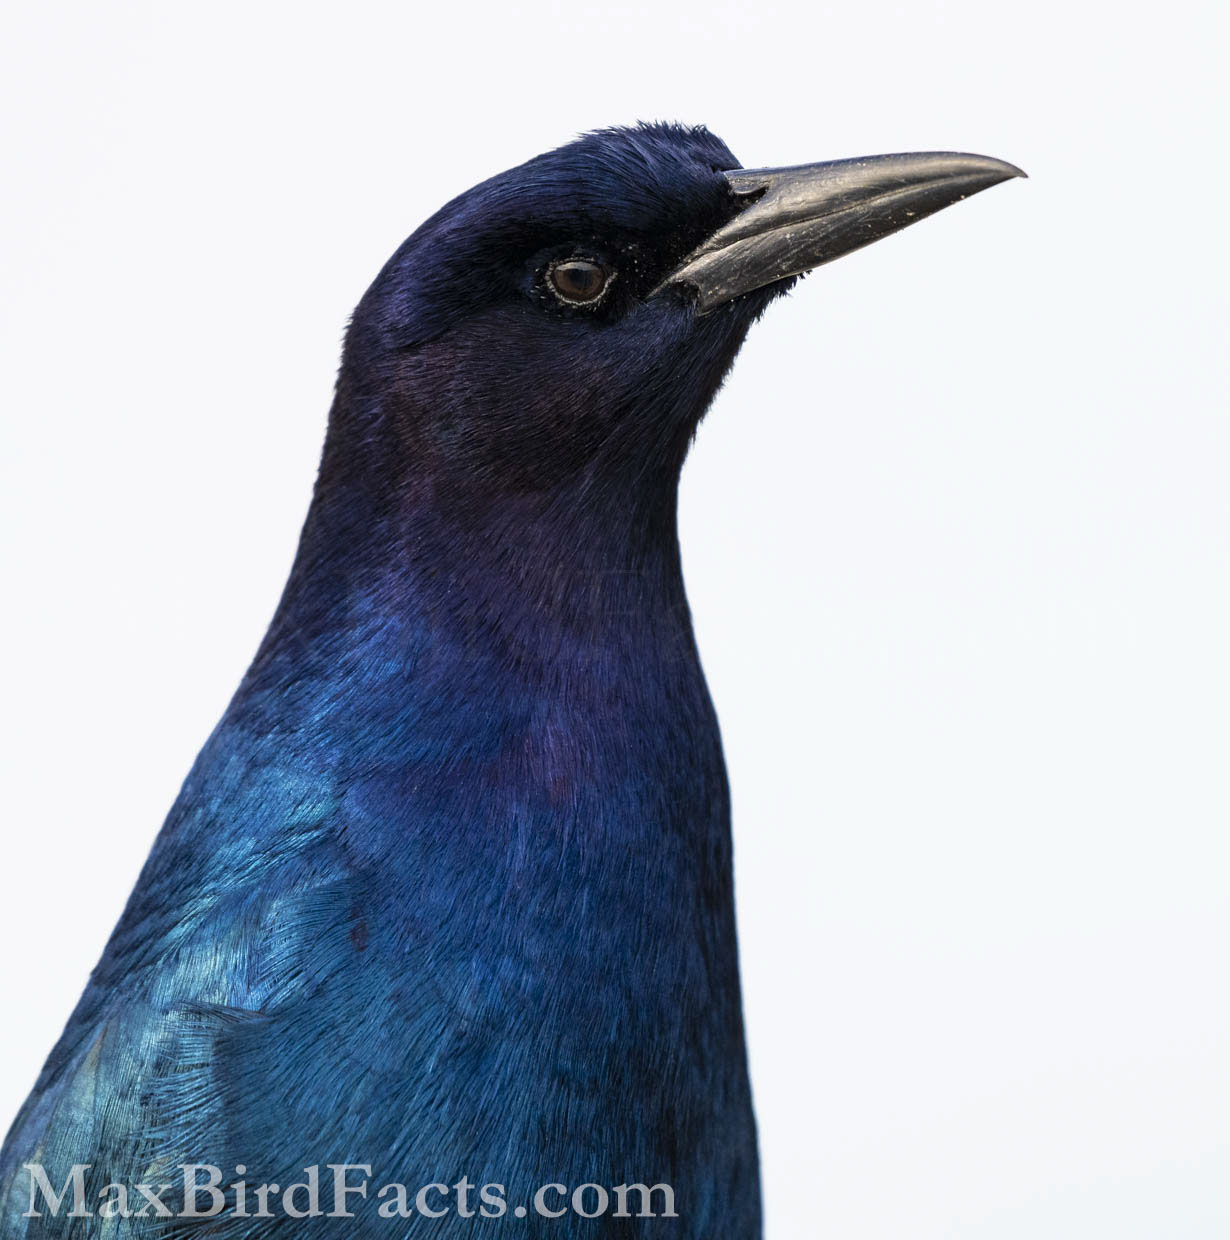 Boat-tailed Grackles (Quiscalus major) are among my favorite common birds in Florida. Even though they are seemingly bland “blackbirds,” if you take the time to study them, their true beauty will shine. (Apopka, FL. 2021)